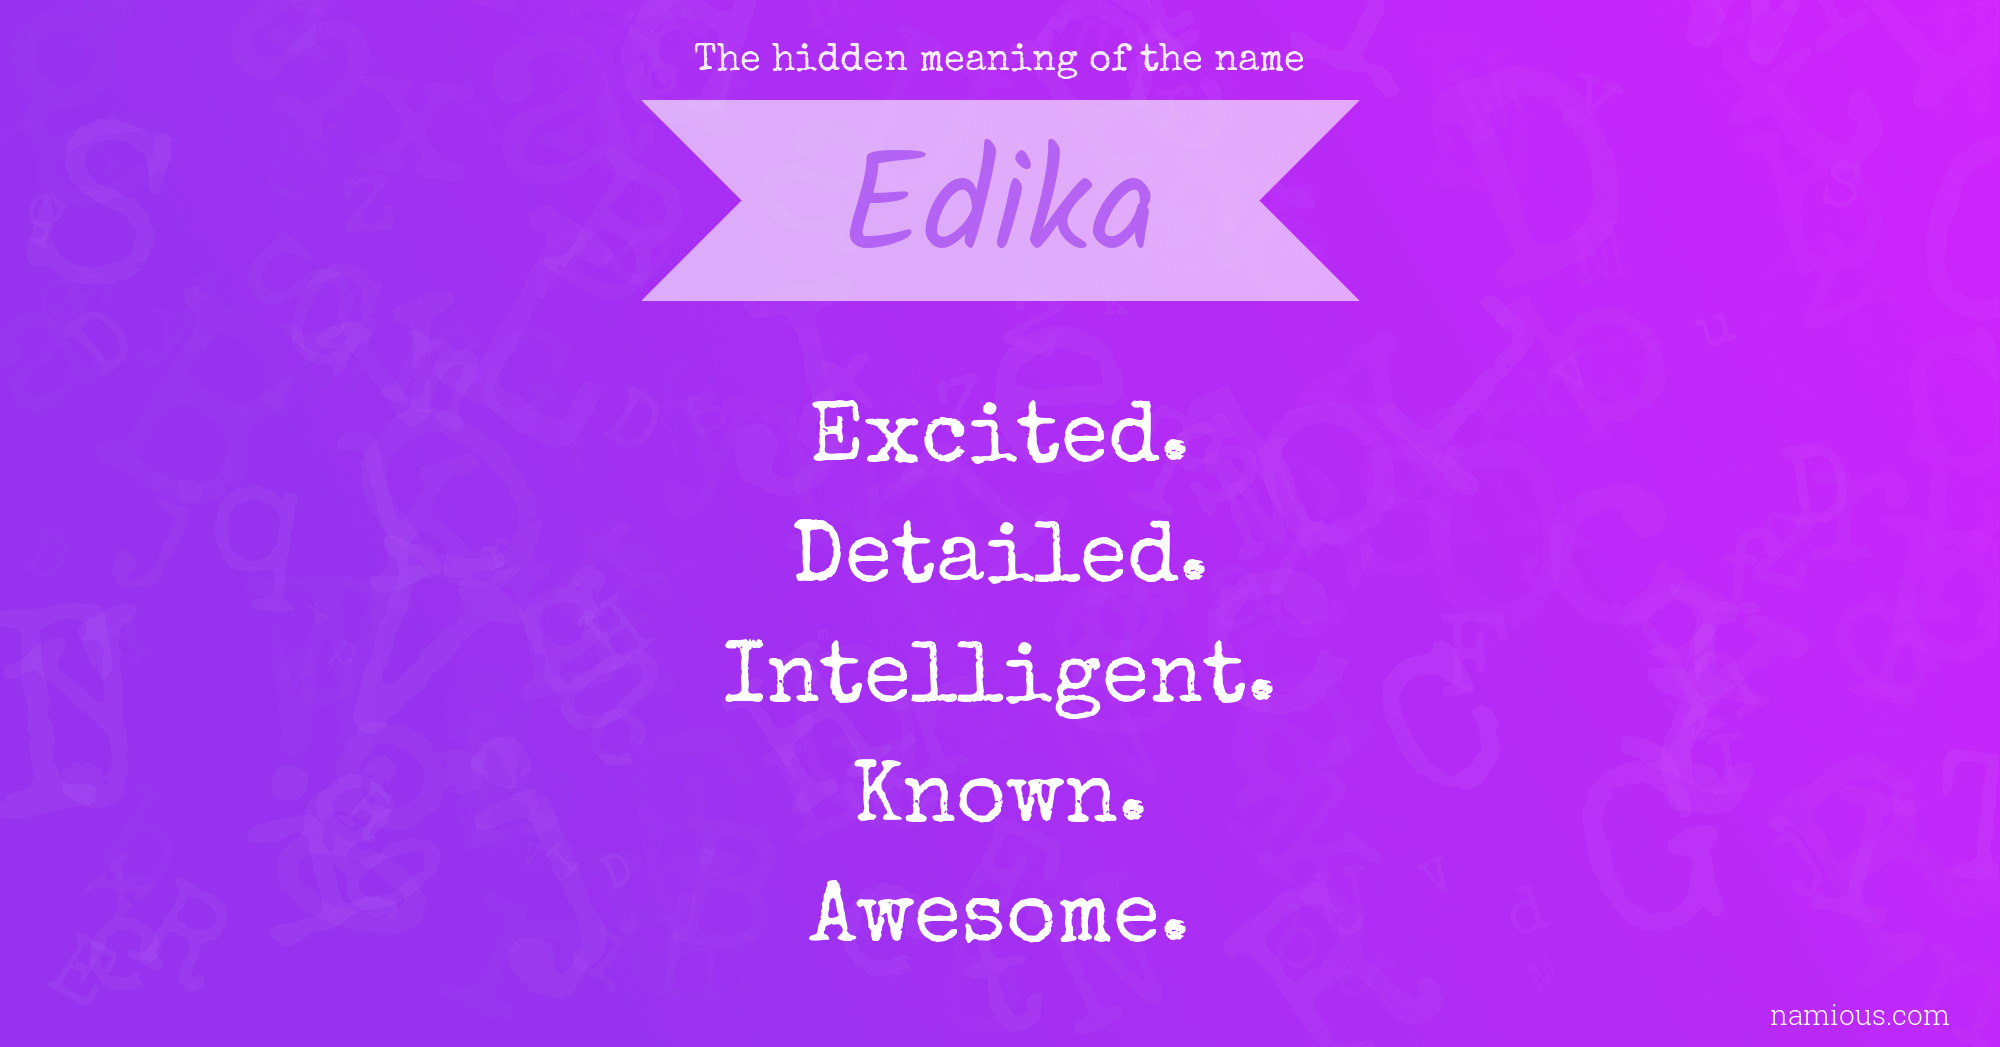 The hidden meaning of the name Edika